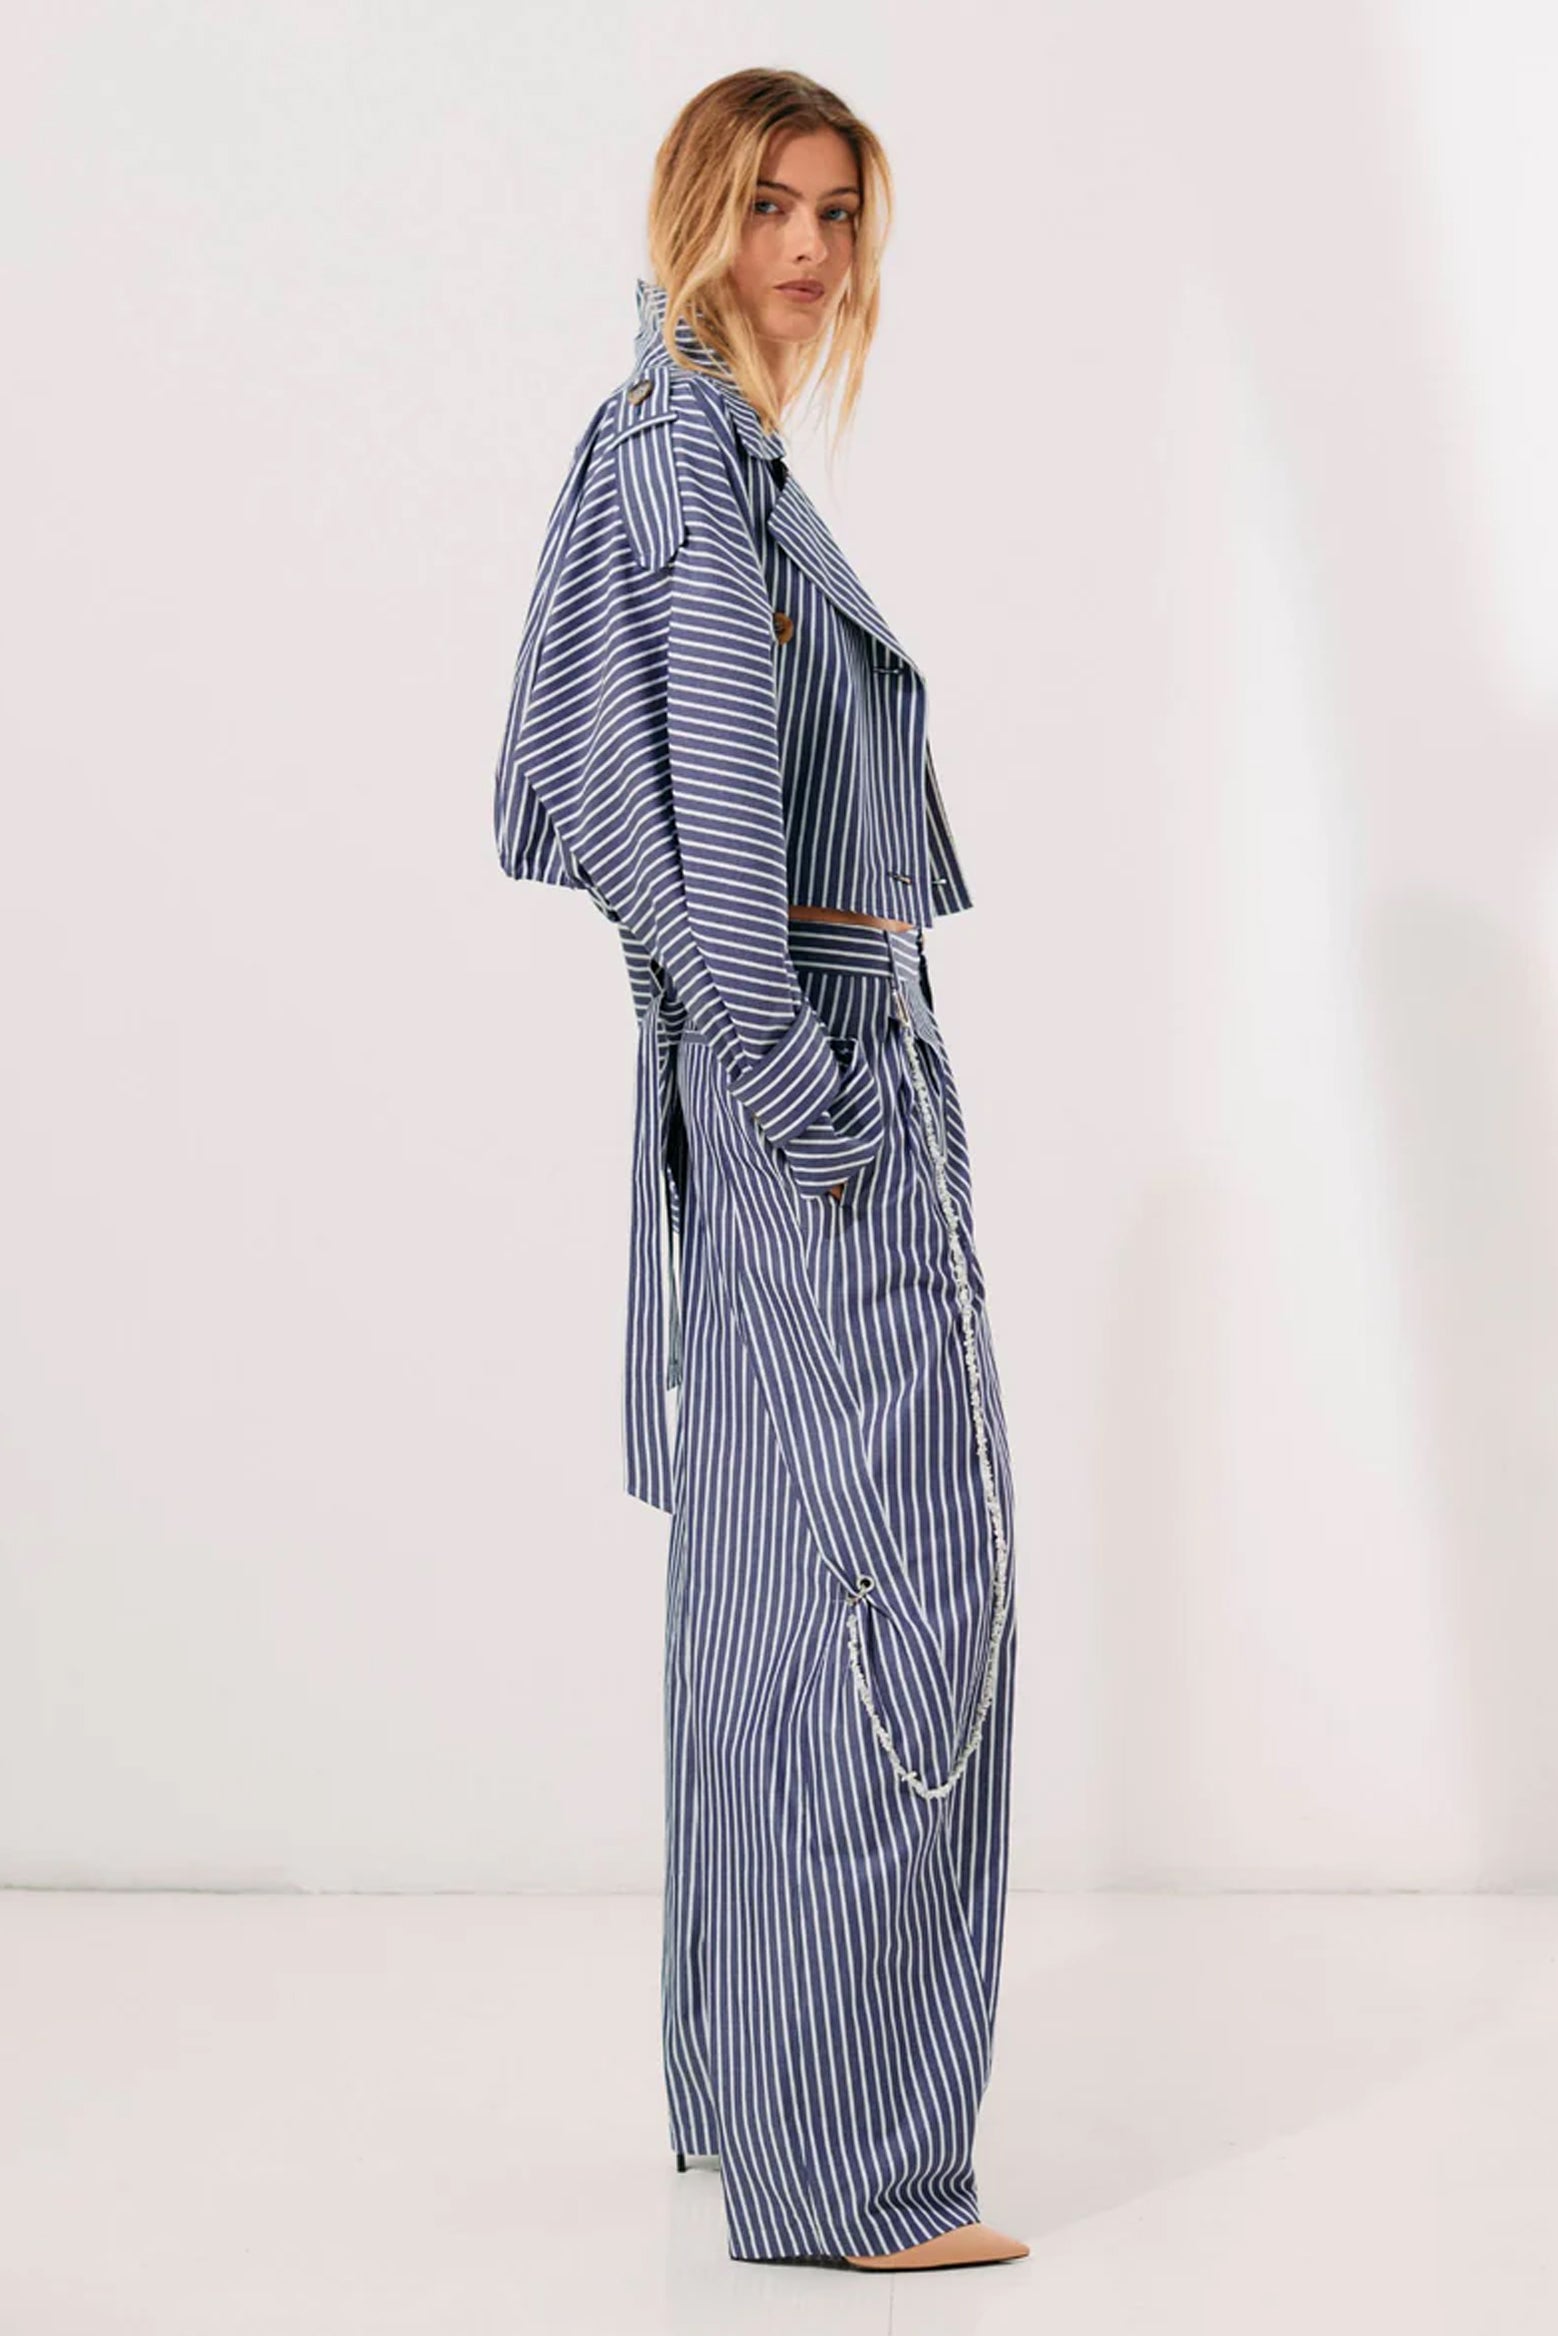 Darkpark Phebe Wide Leg Pants in Raw Blue/White available at The New Trend Australia.